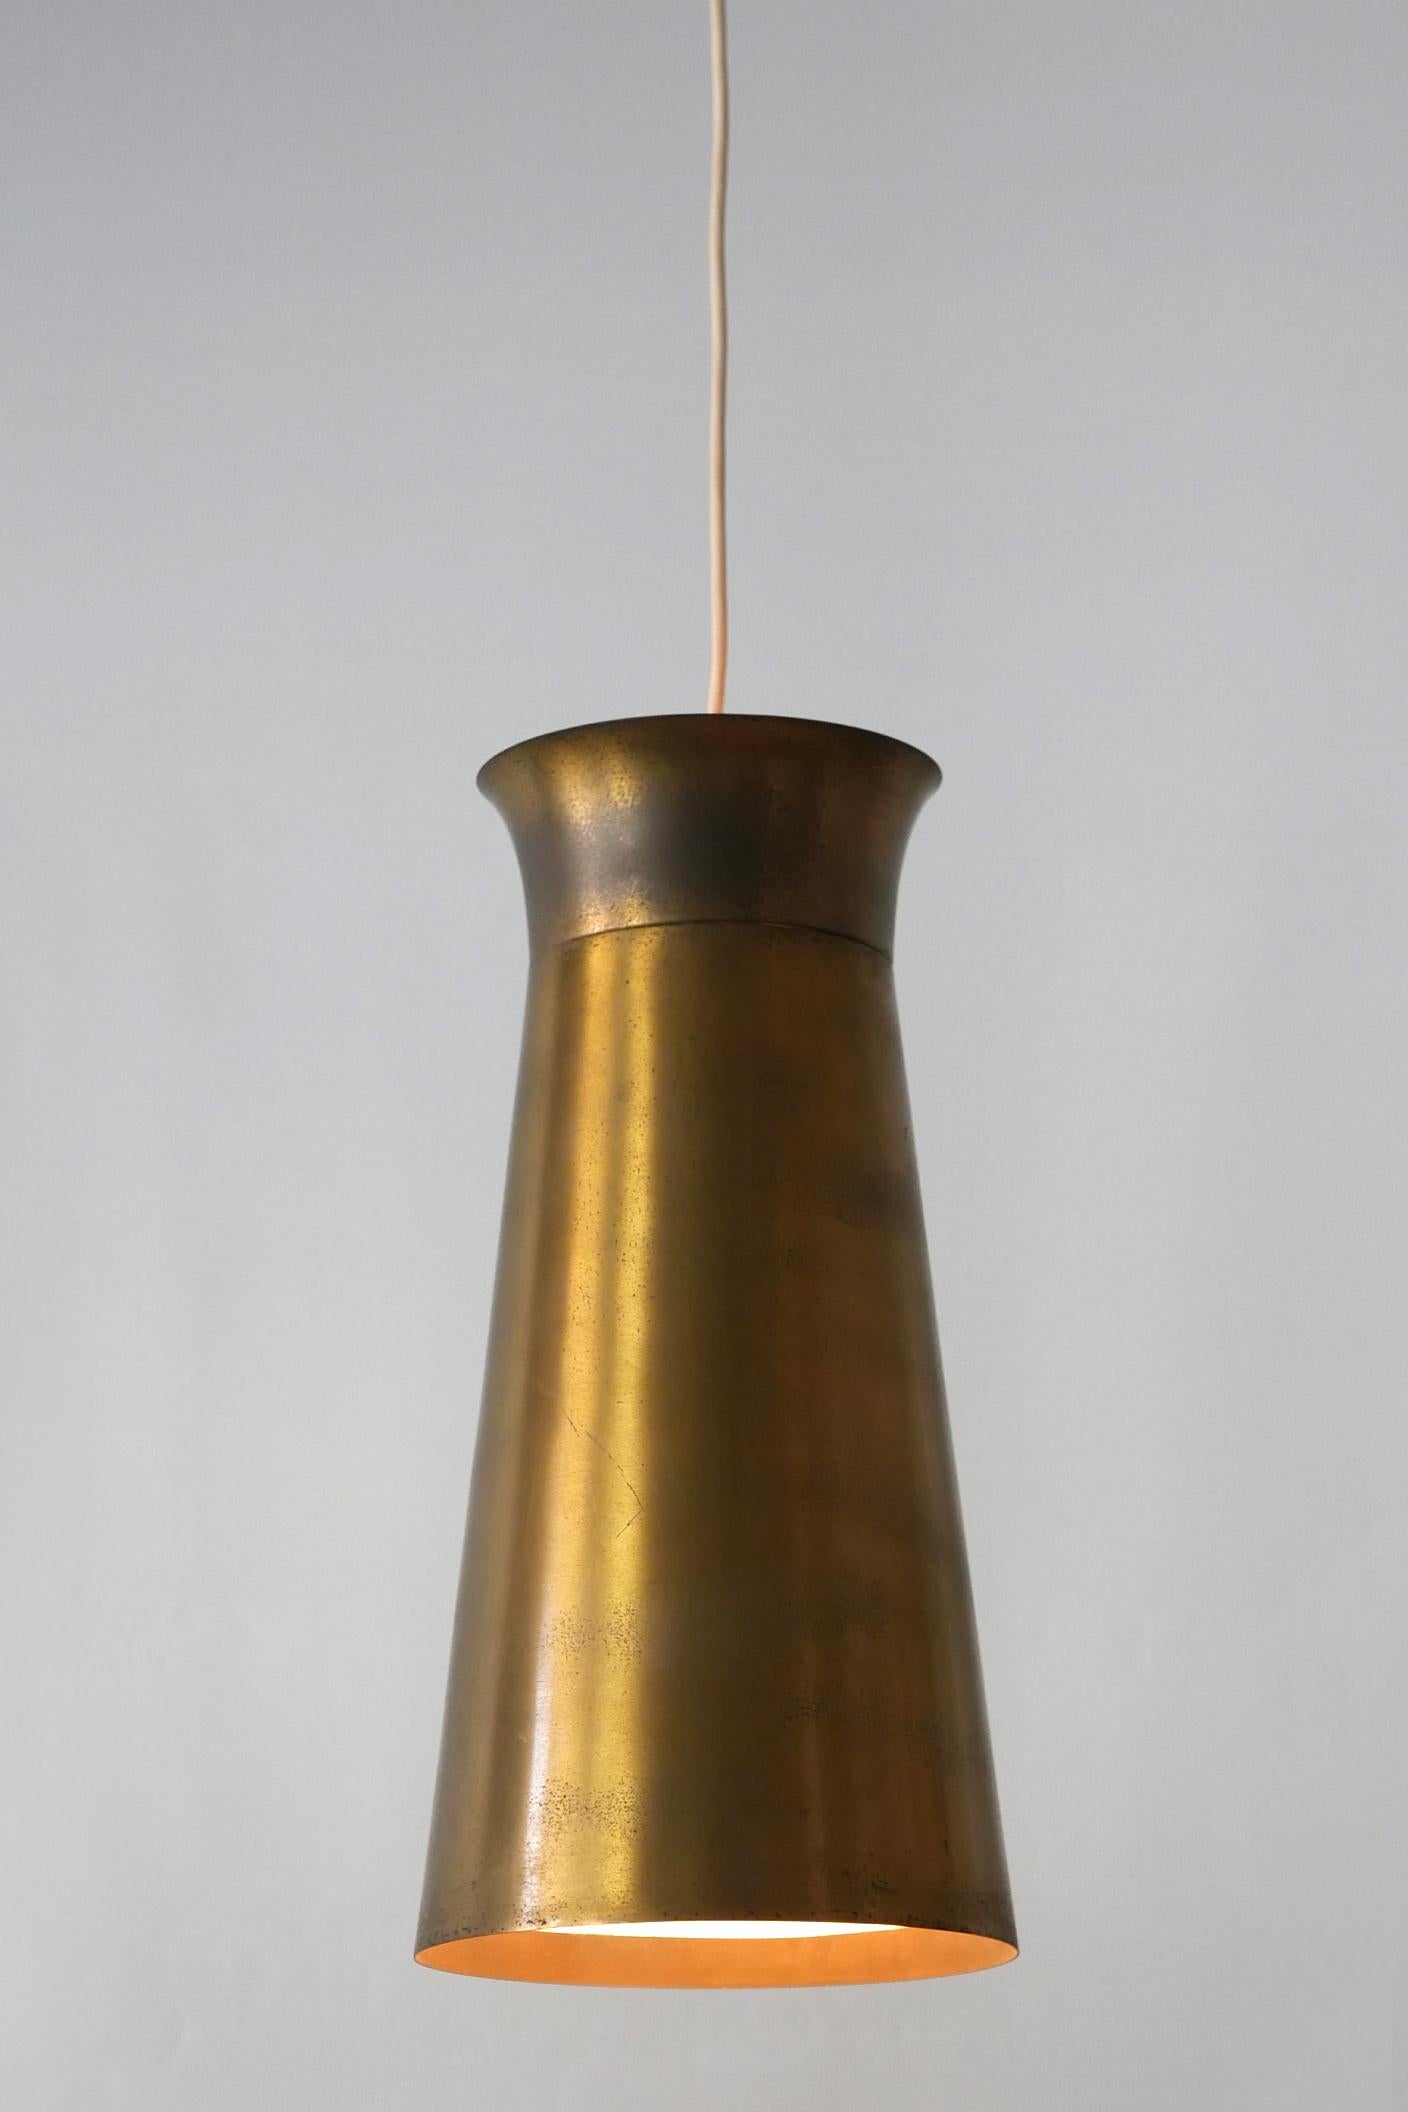 Elegant Mid-Century Modern Brass Pendant Lamps or Hanging Lights, 1950s, Germany For Sale 8